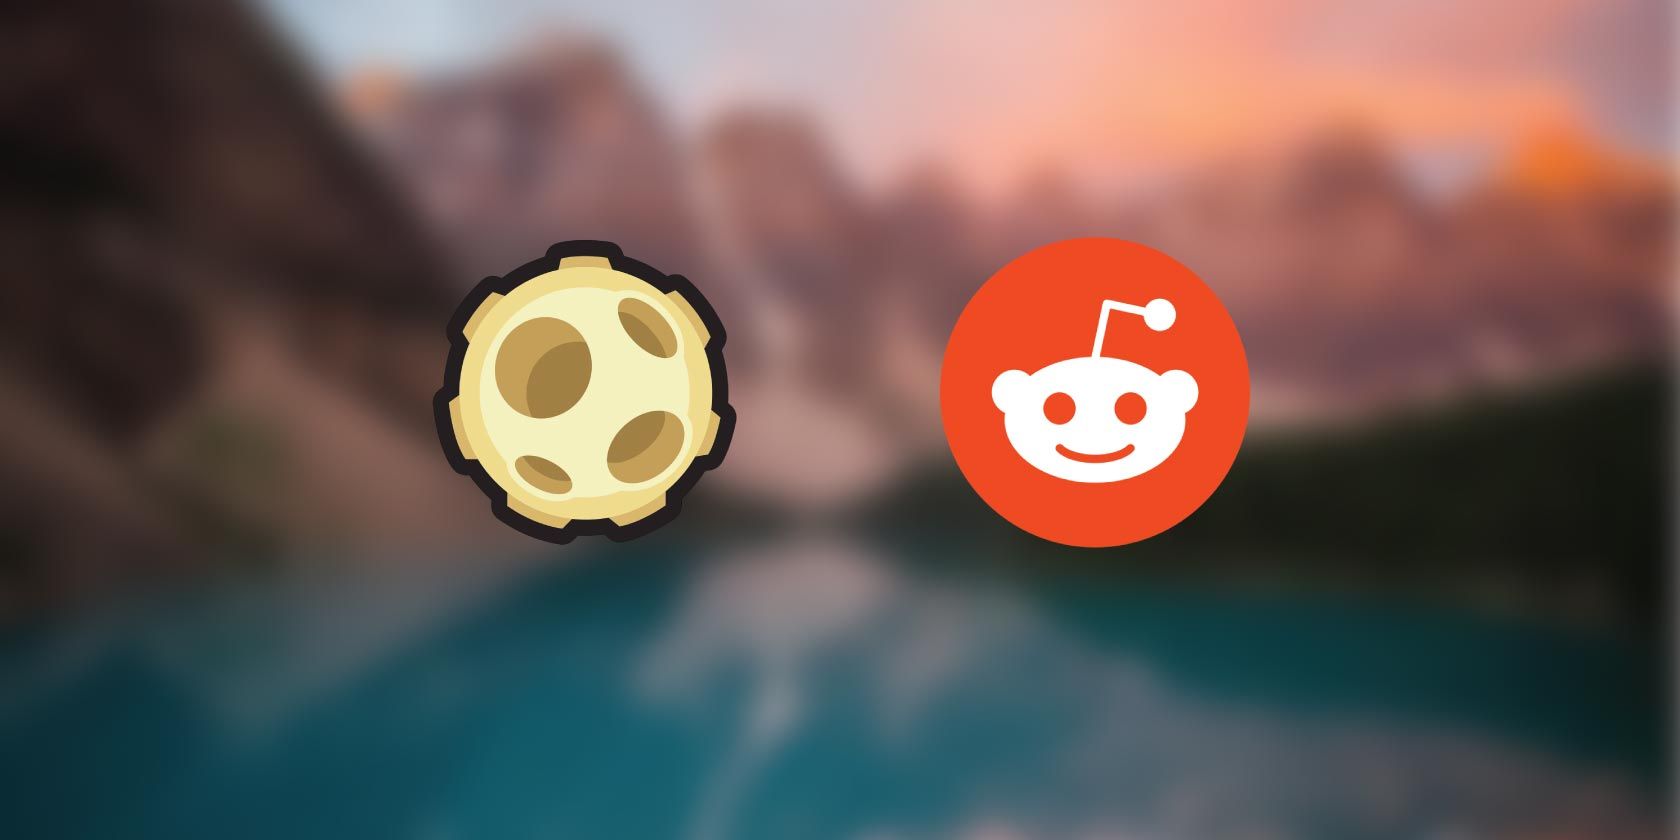 Reddit Moon logo next to Reddit logo with a blurred background of a valley lake landscape